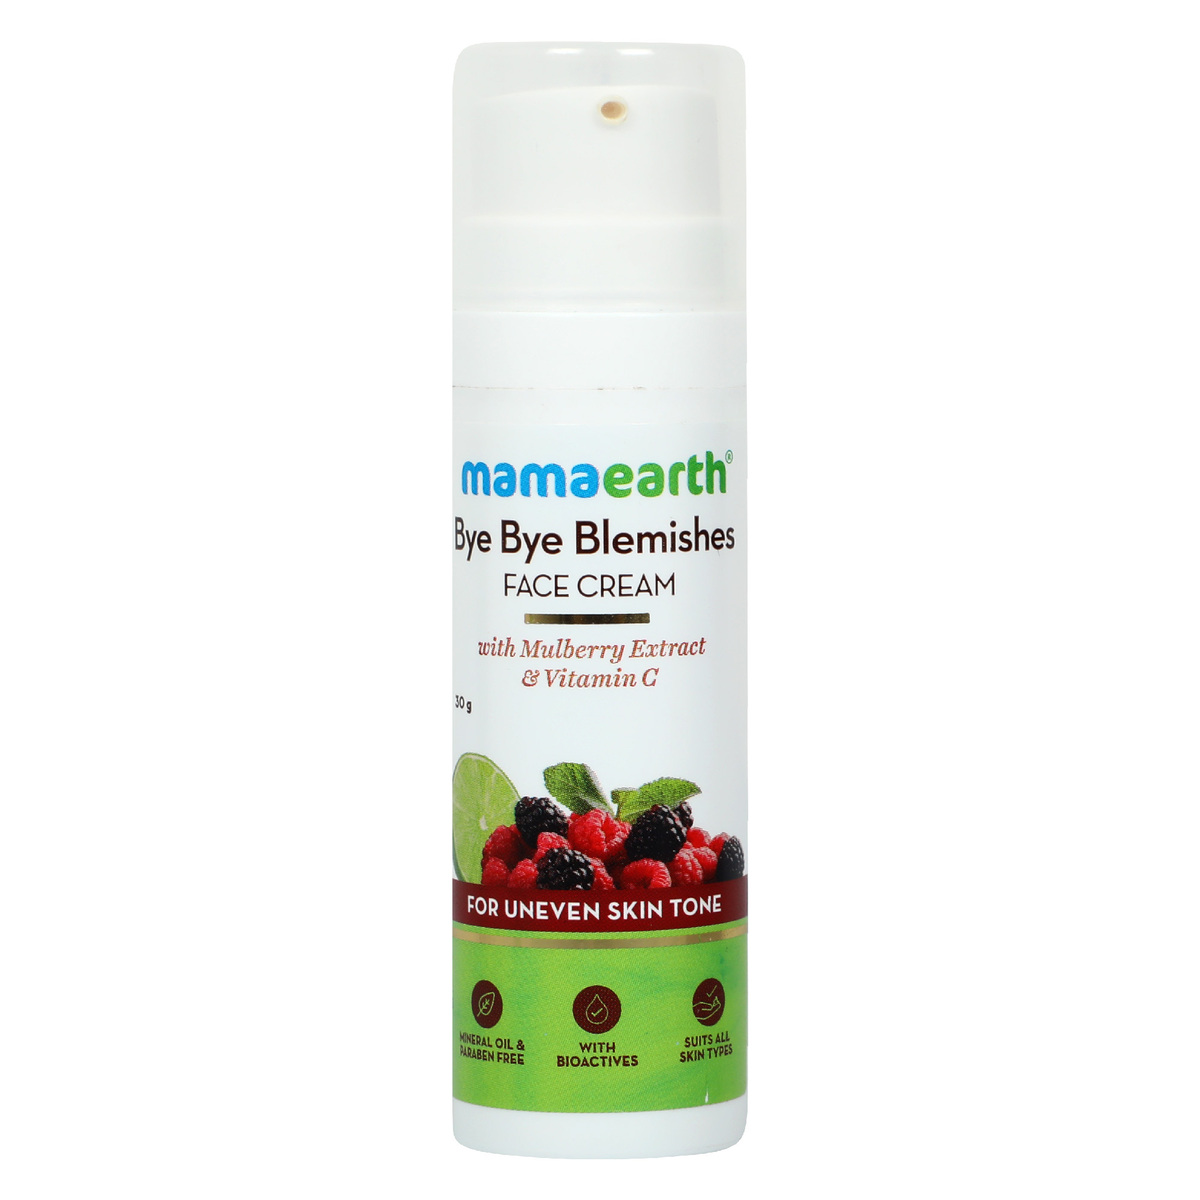 Mamaearth Bye Bye Blemishes Face Cream 30 g